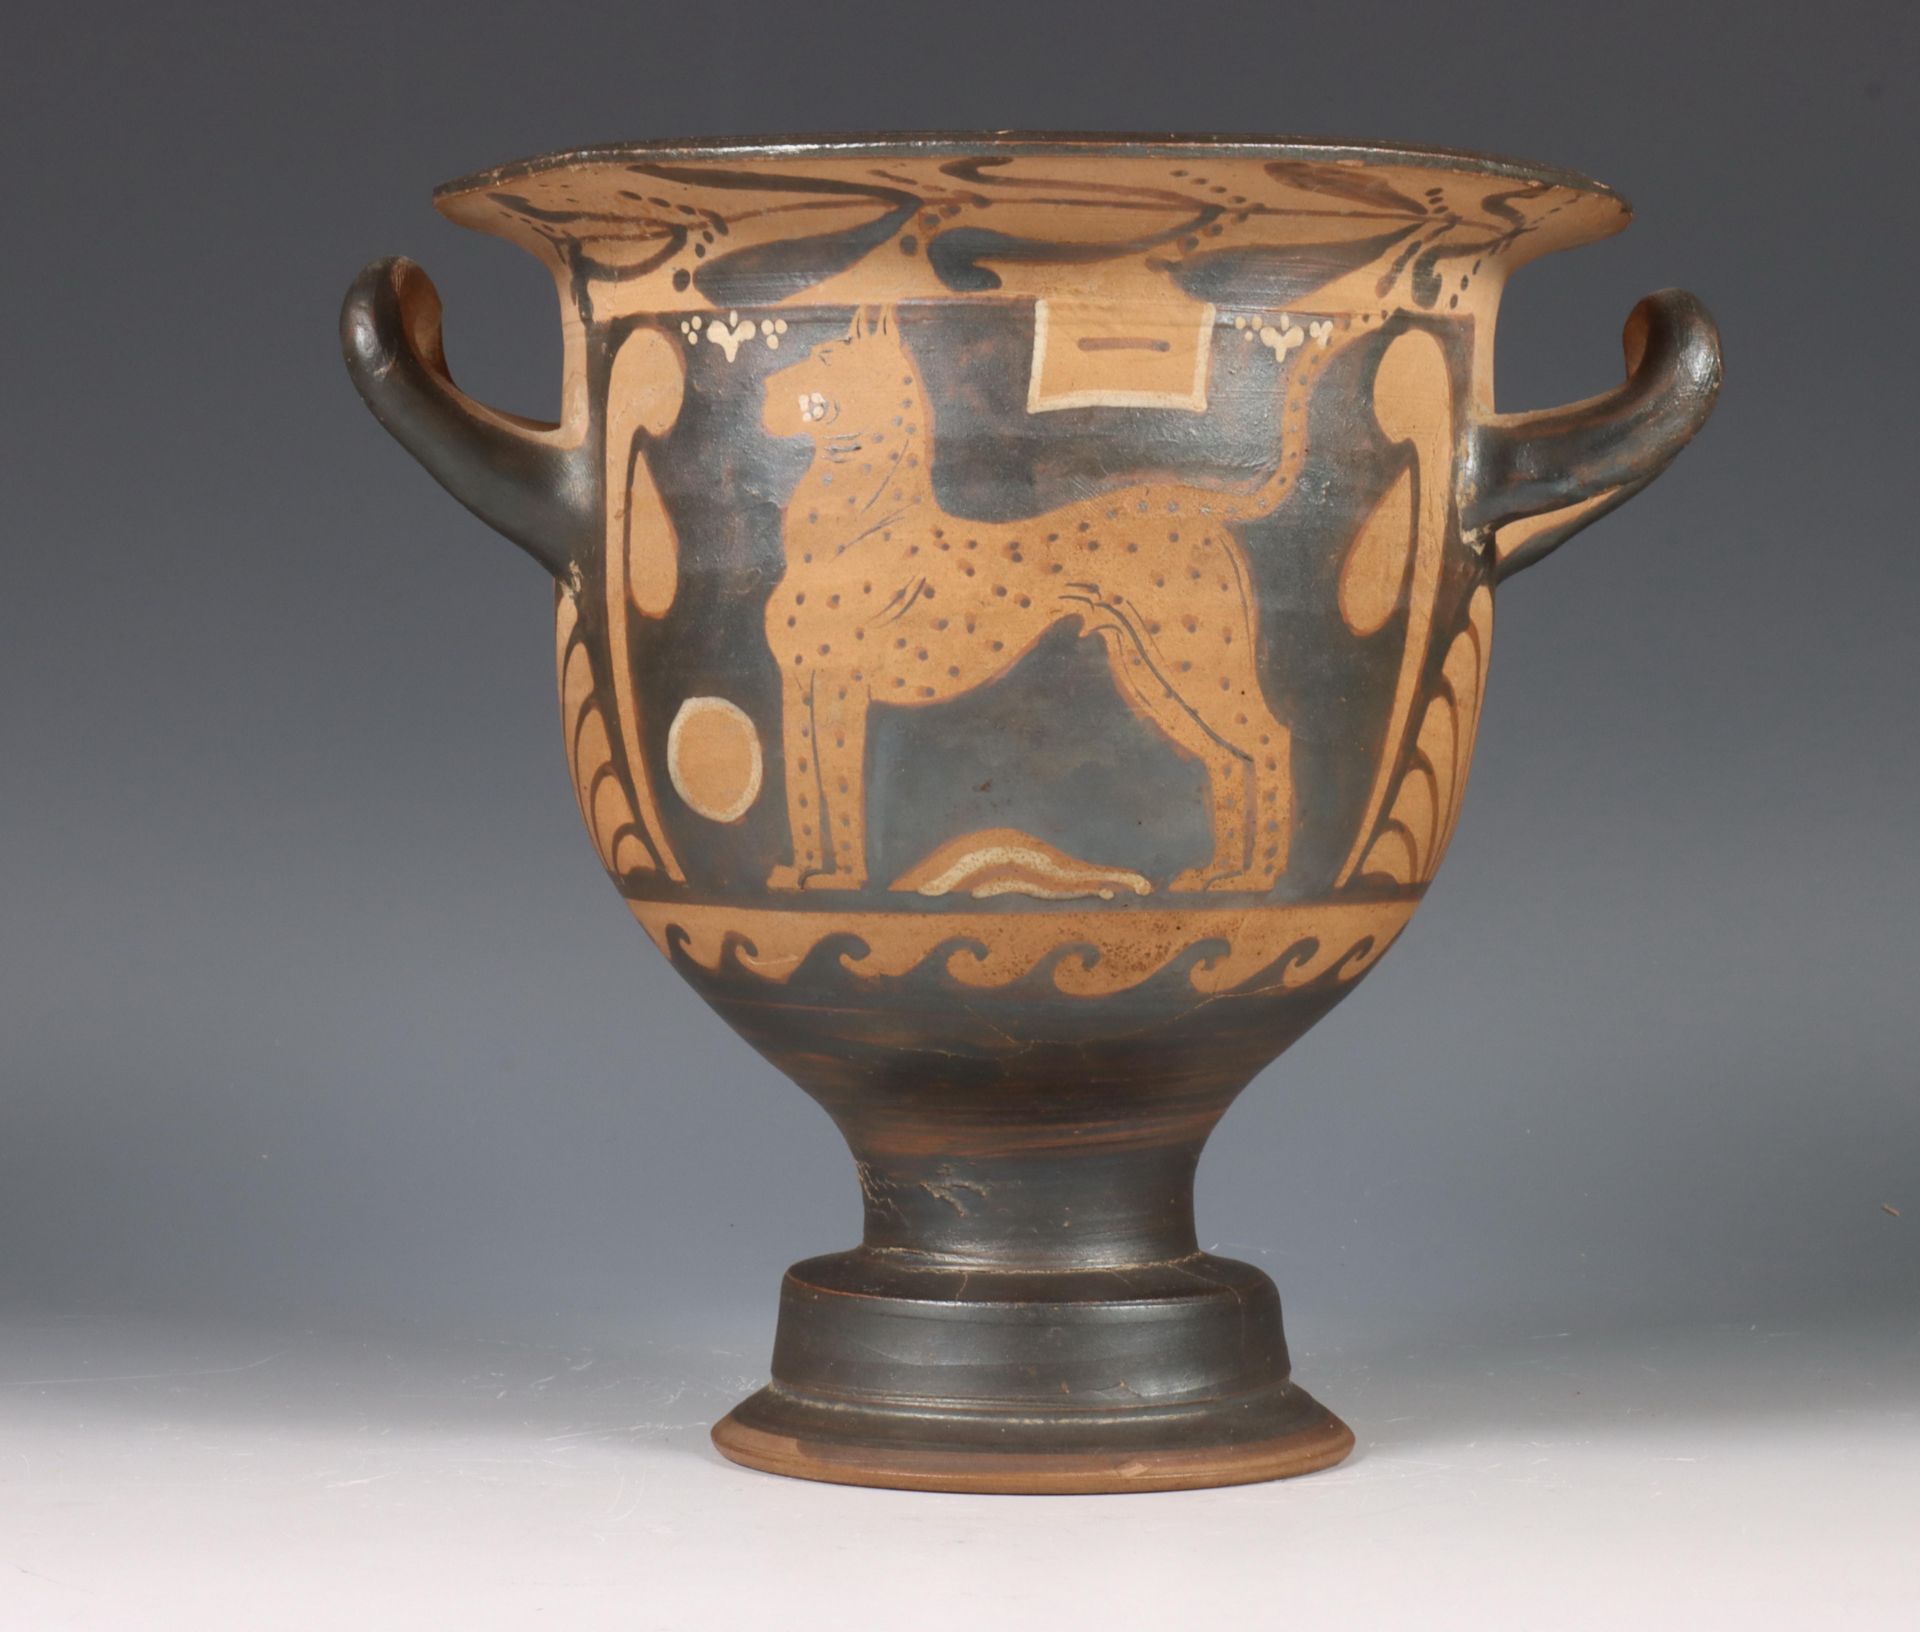 Apulia, small earthenware krater, ca. 300 BC. - Image 4 of 6